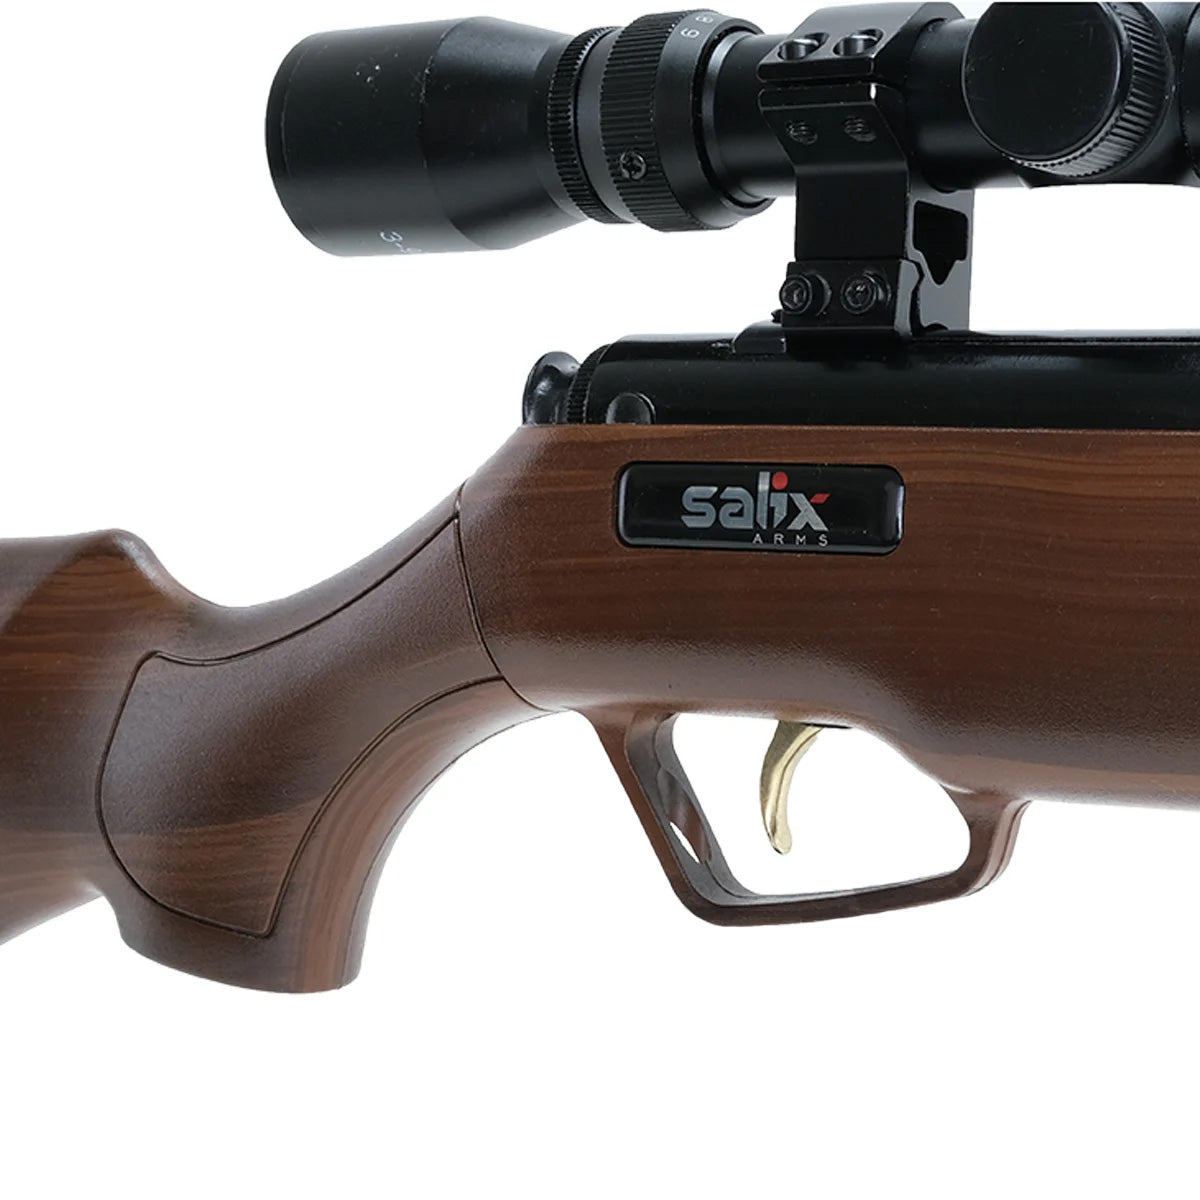 SALIX, TRIMEX ARMS TX01 BREAK BARREL SPRING AIR RIFLE WITH SYNTHETIC STOCK .177